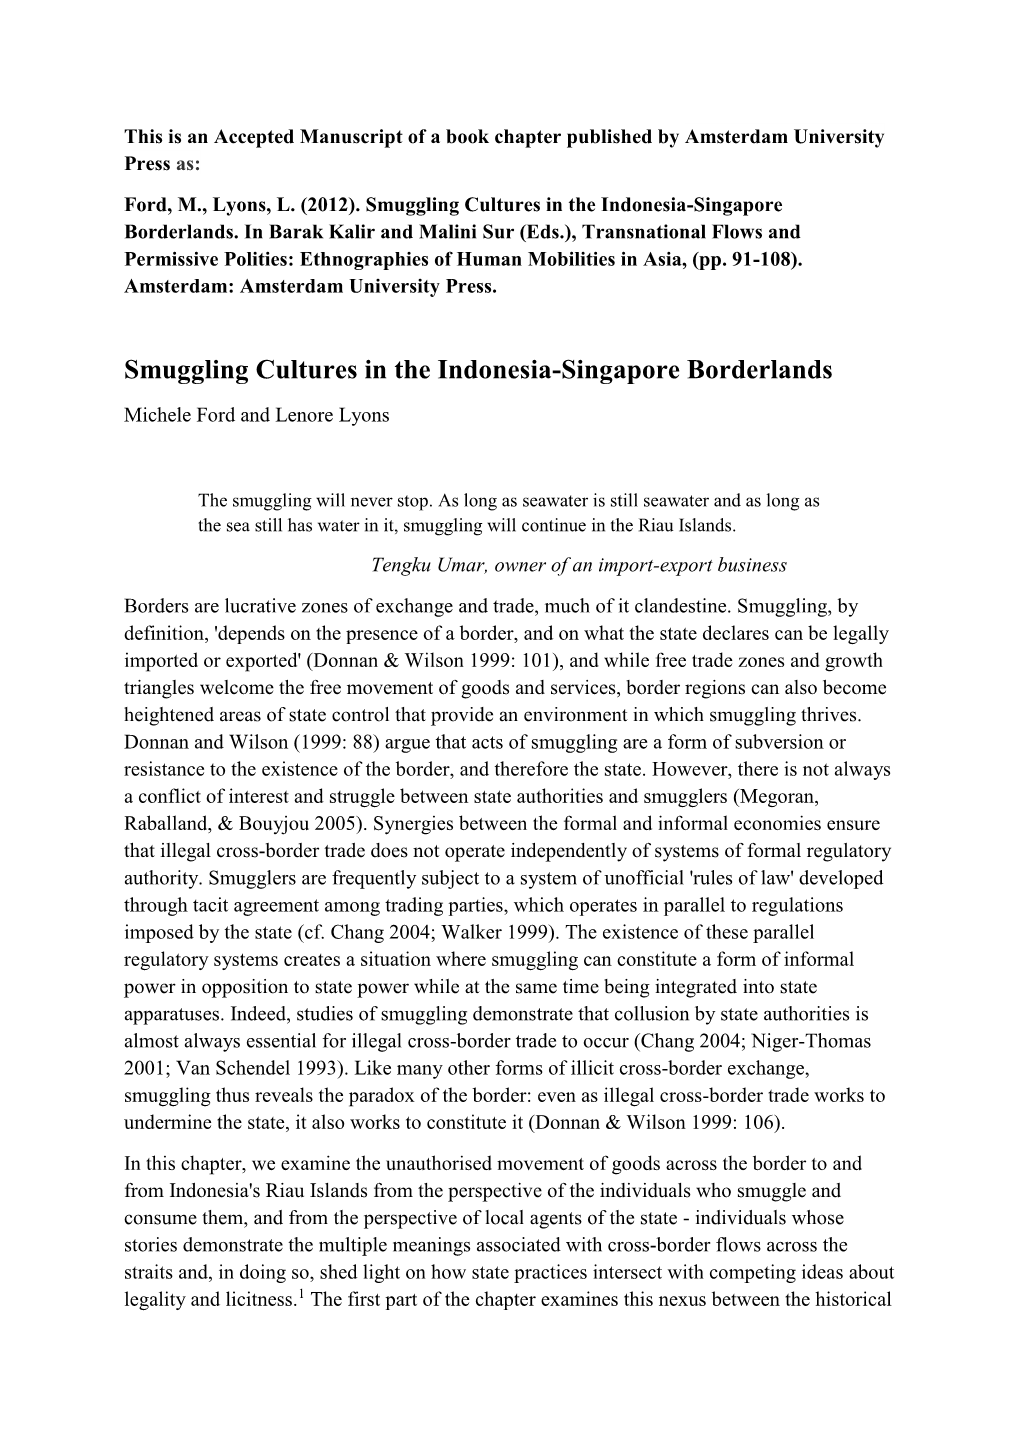 Smuggling Cultures in the Indonesia-Singapore Borderlands